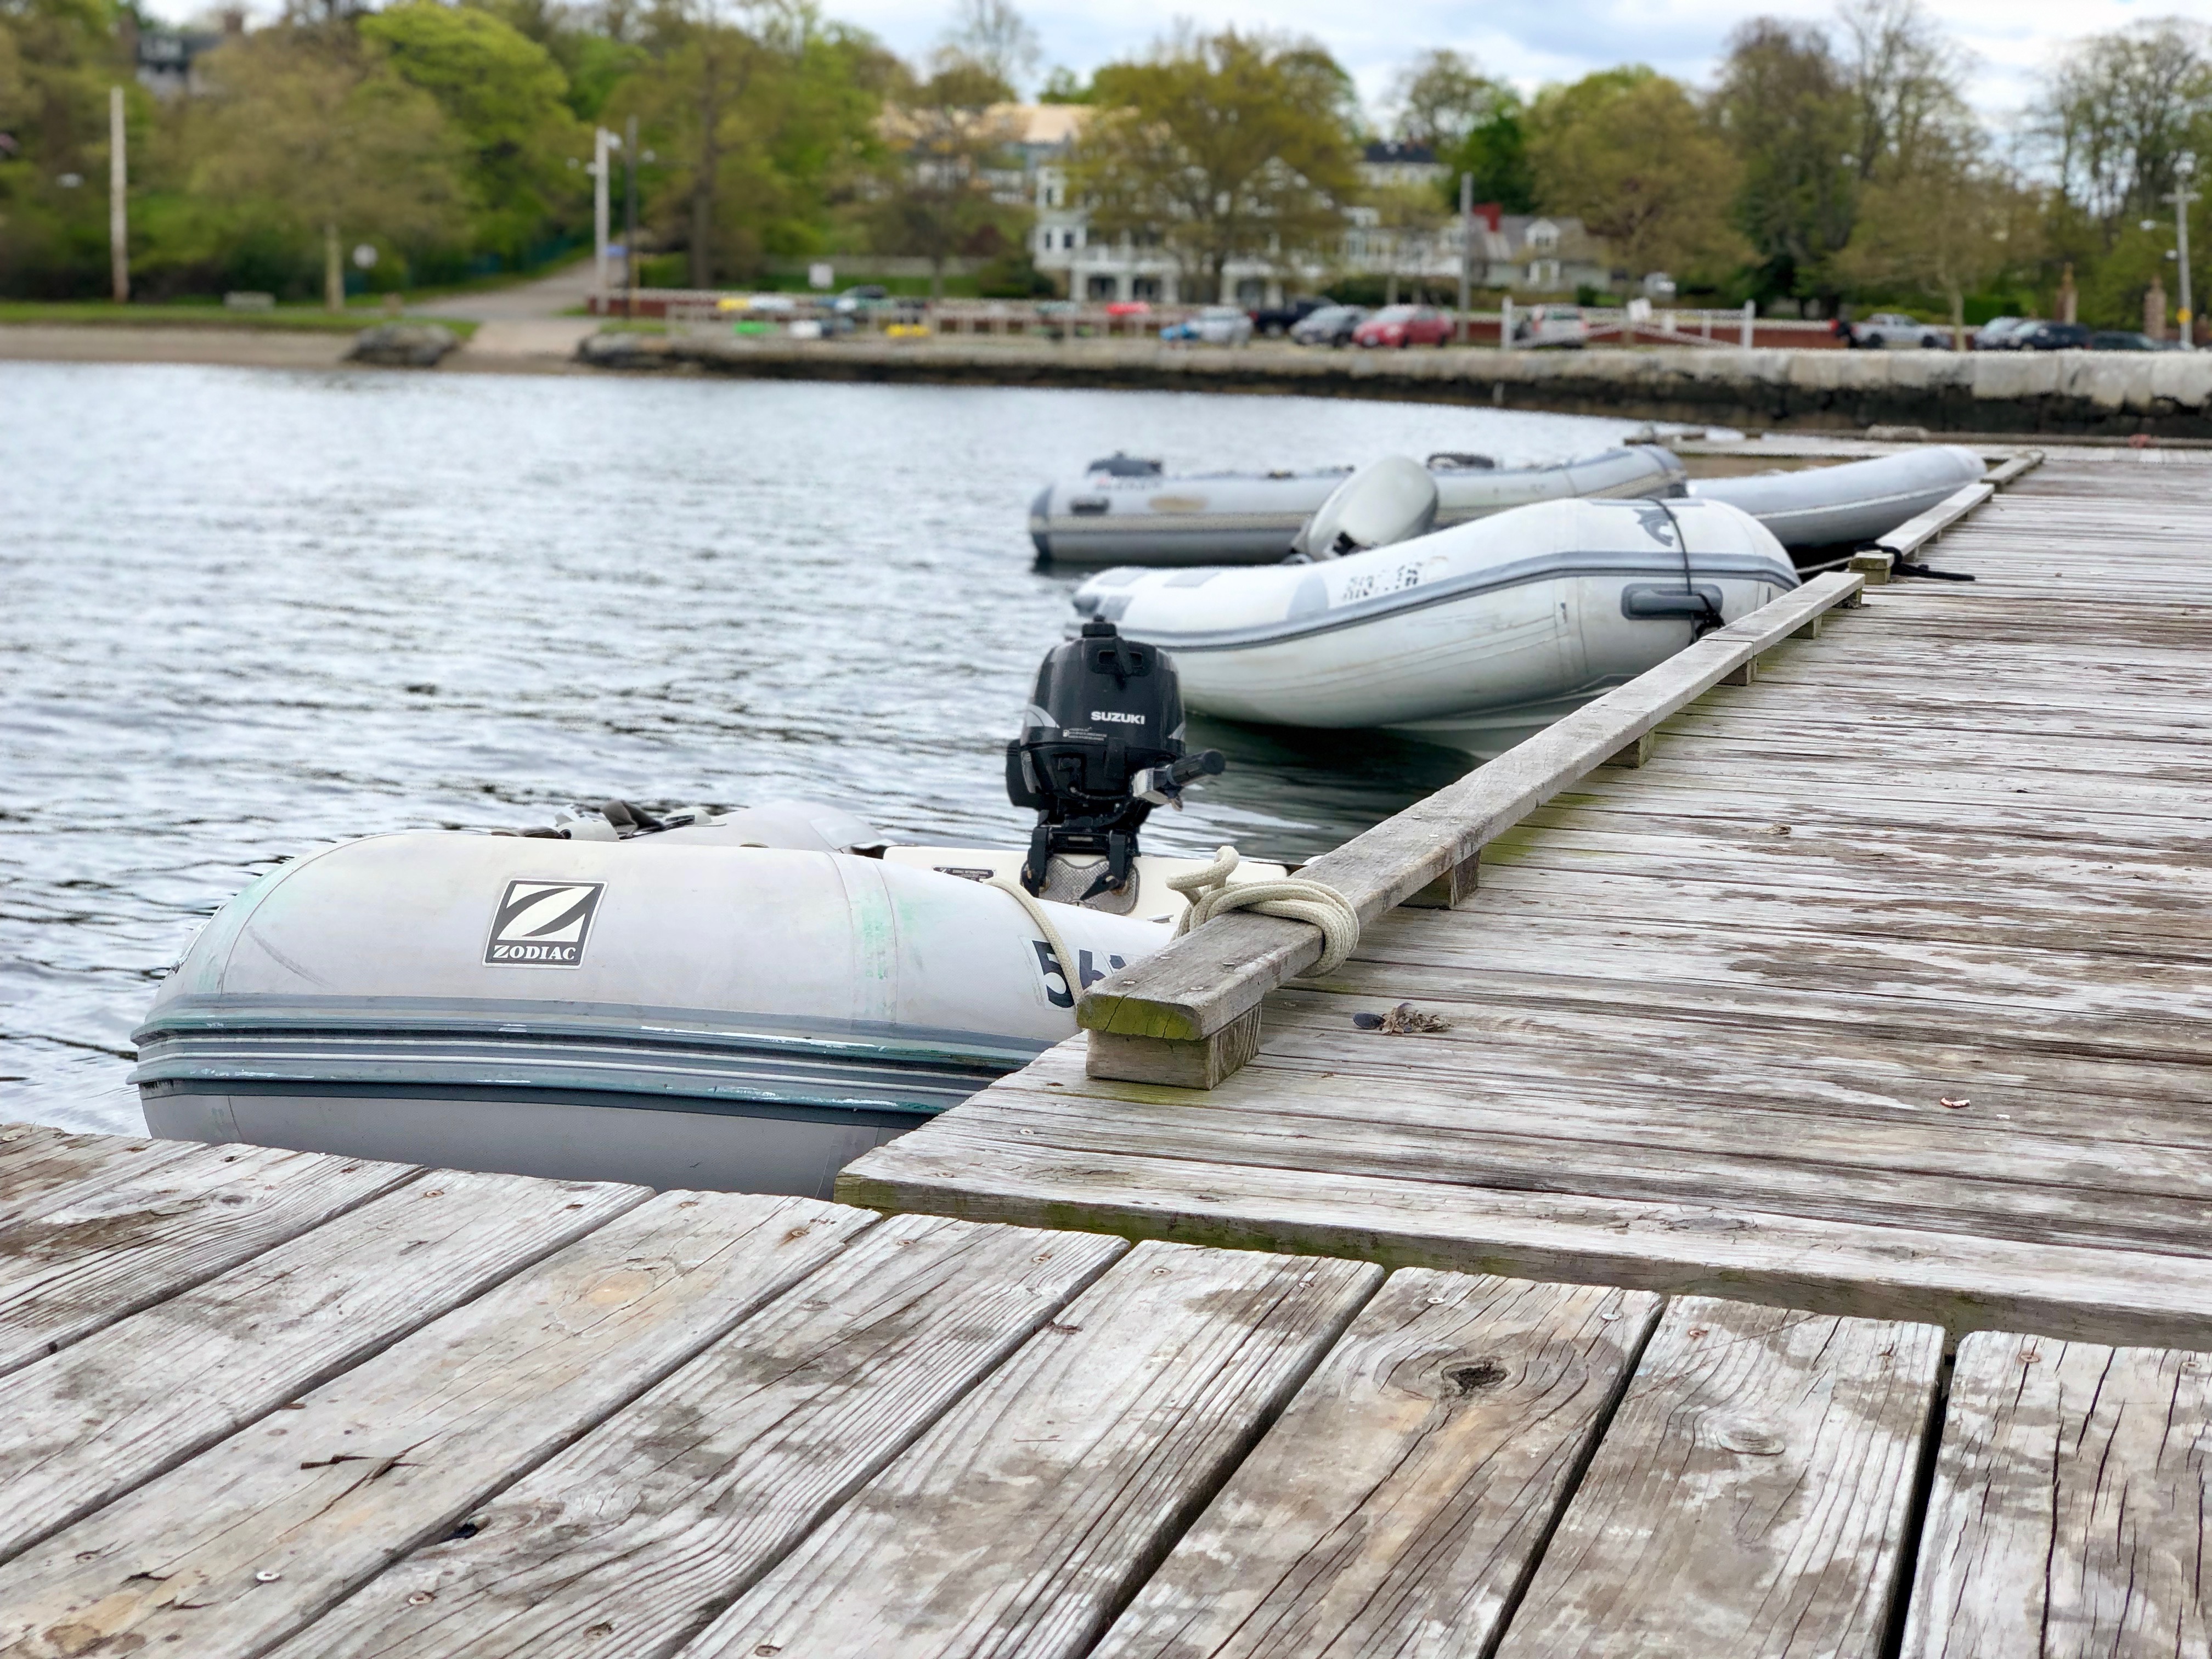 New Program Aims to Cut Down on Overcrowded Dinghy Docks